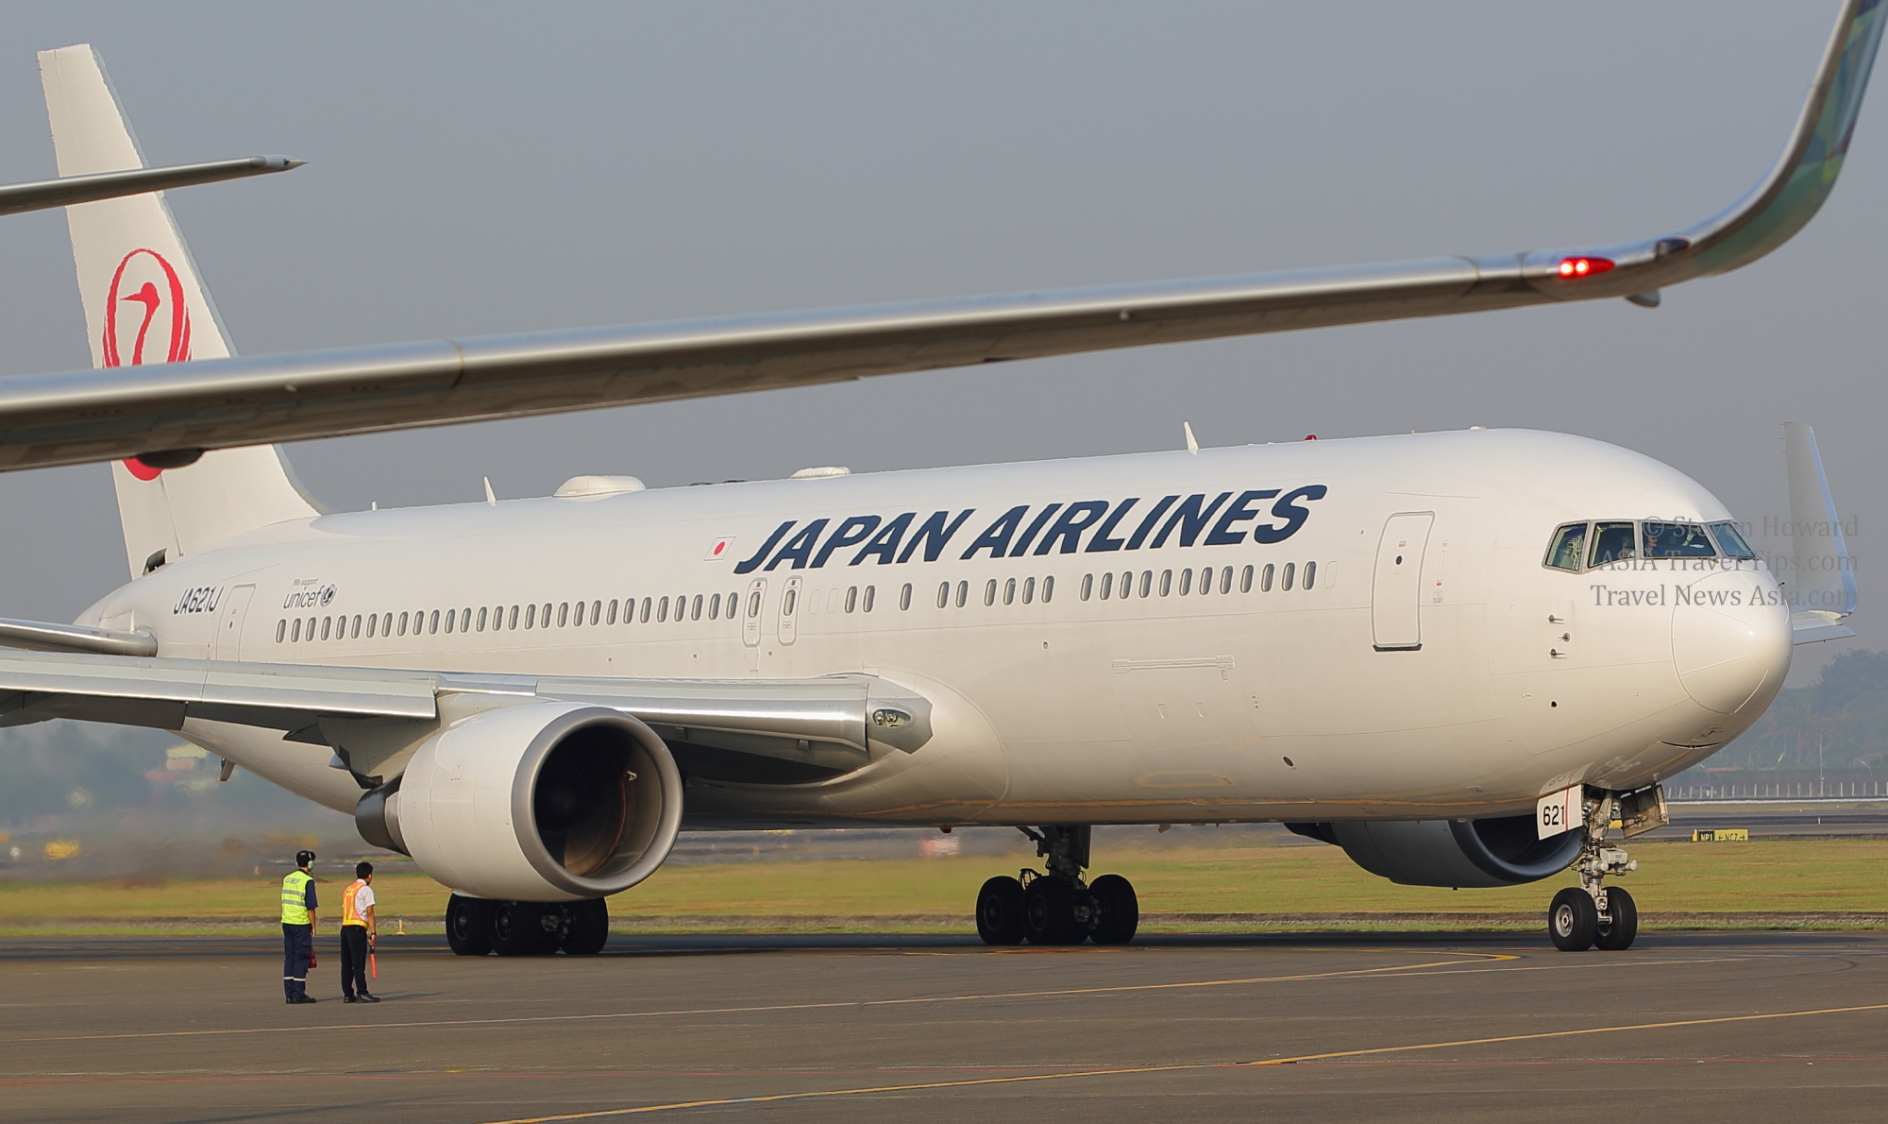 Japan Airlines B767 reg: JA621J. Picture by Steven Howard of TravelNewsAsia.com Click to enlarge.